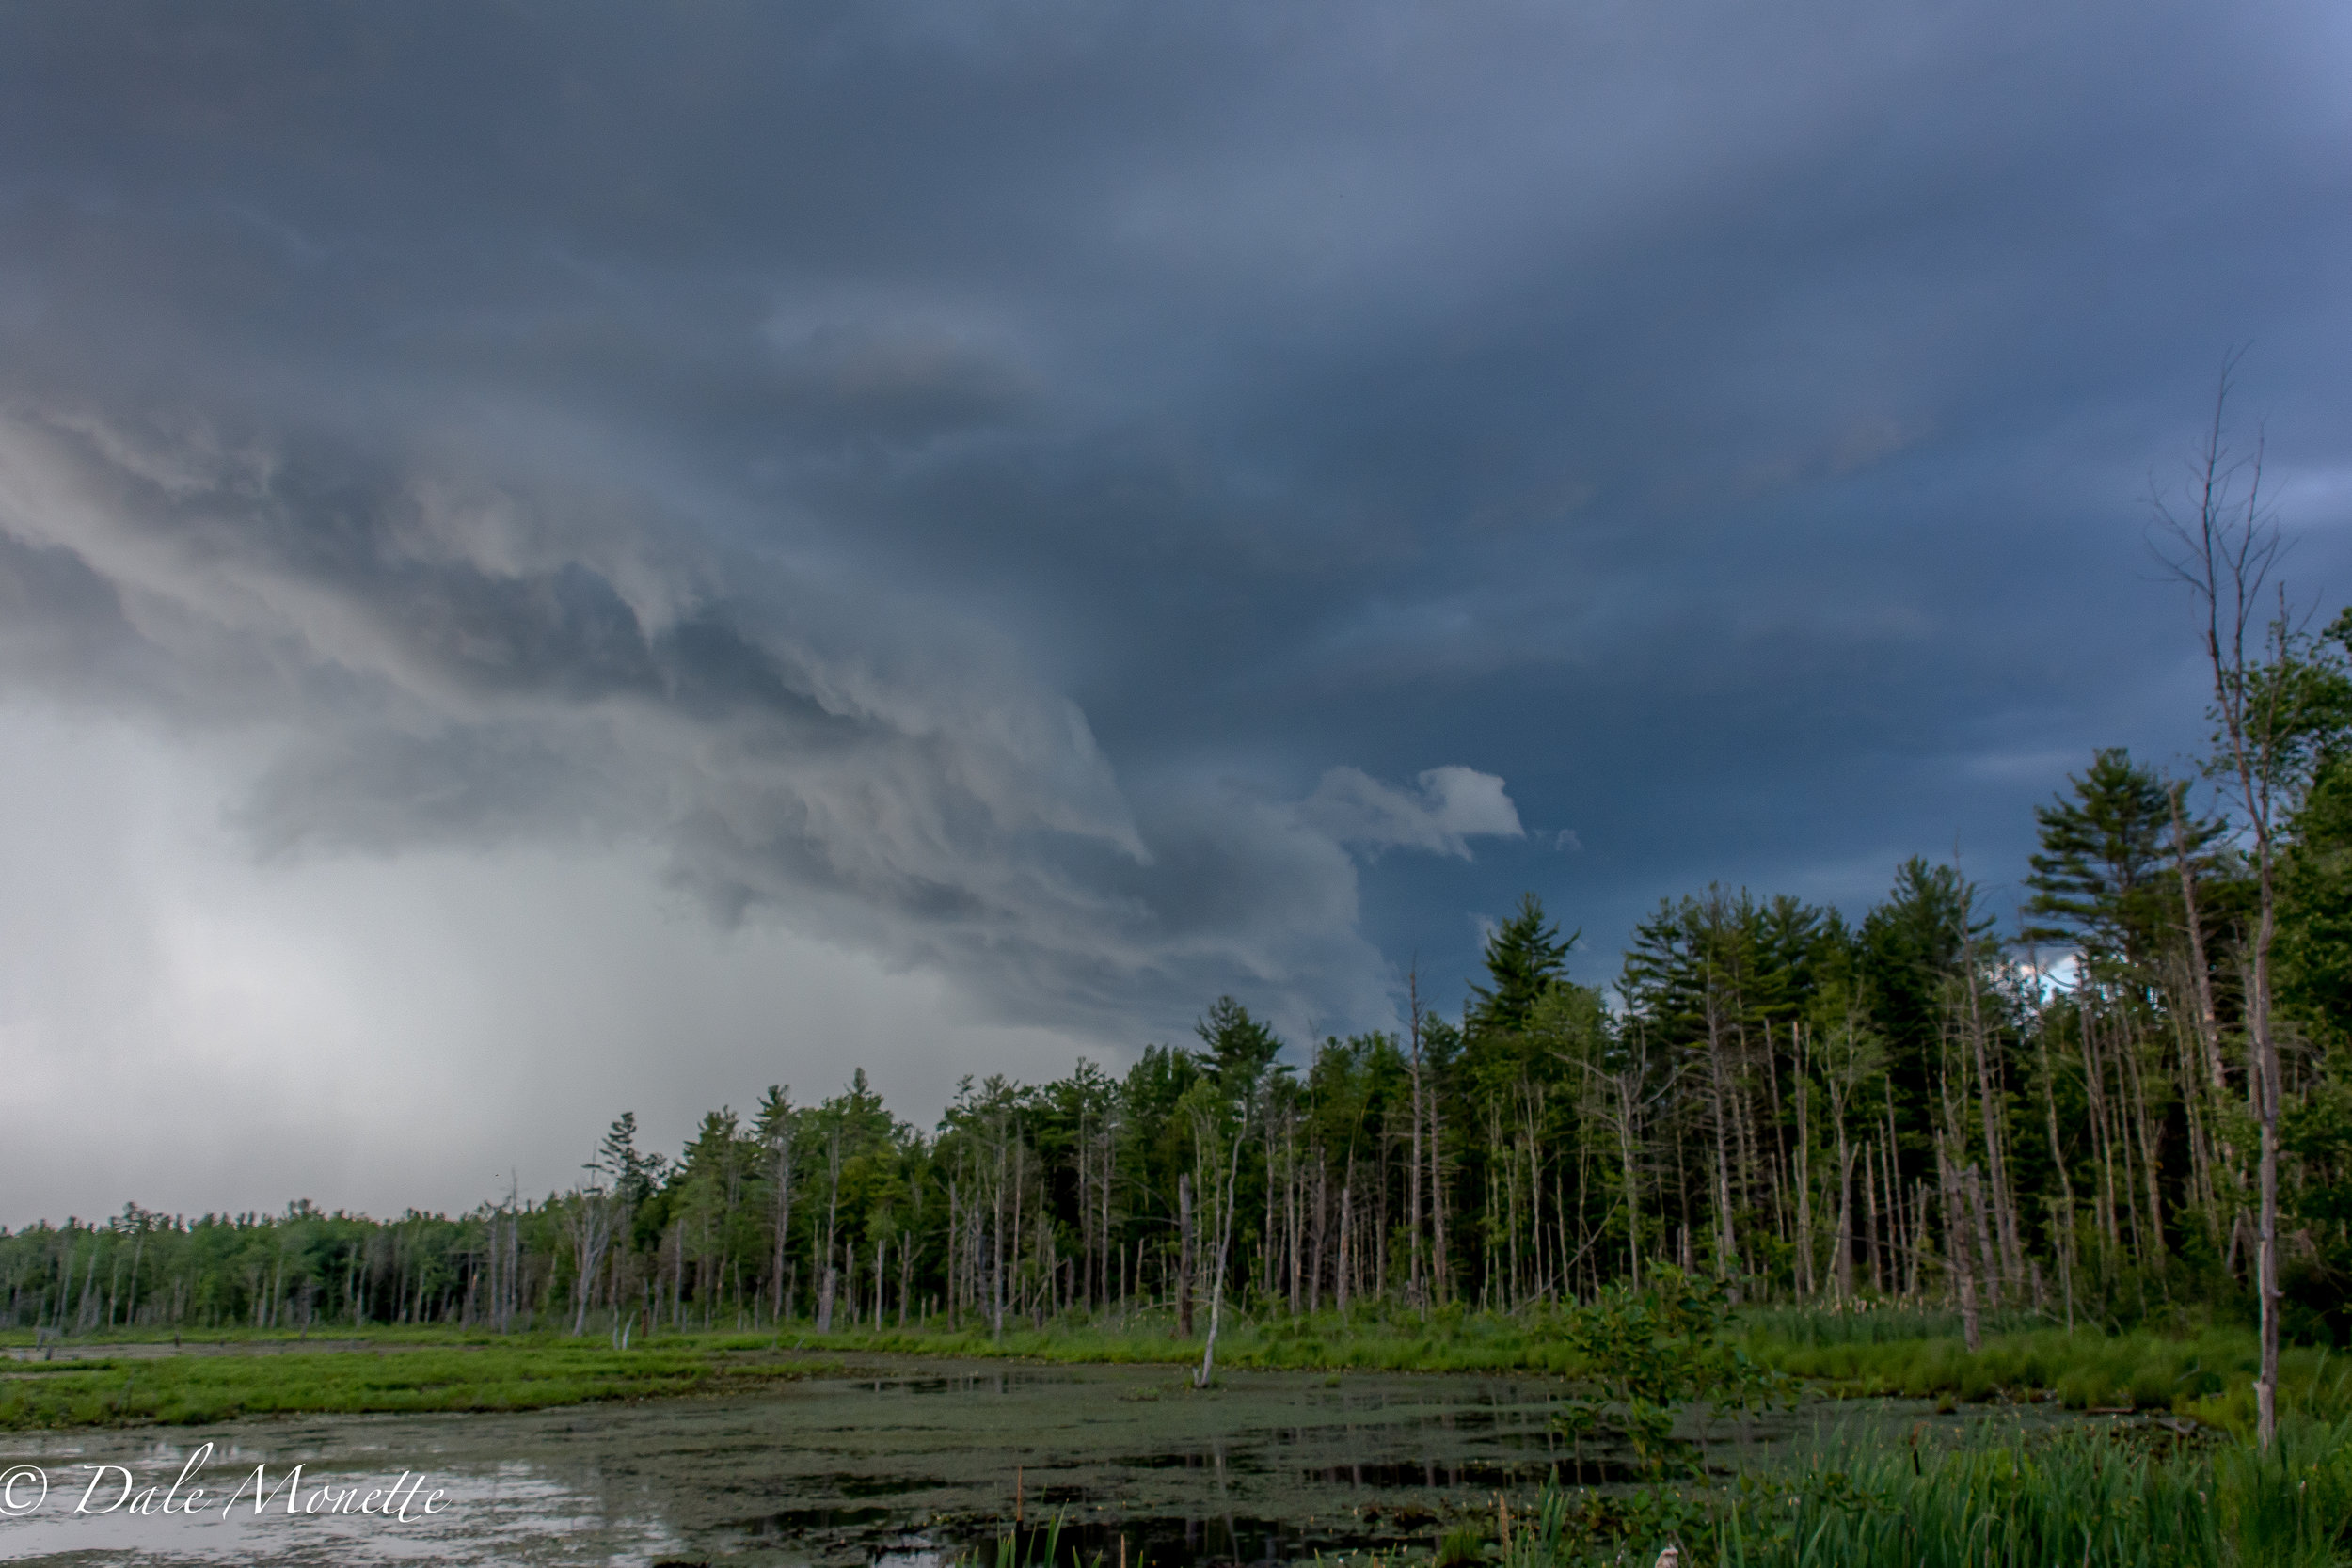   North Orange Wildlife management area about an hour ago (6:45PM) this thunder storm built up right in front of us as we were watching herons...... 6/25/17  